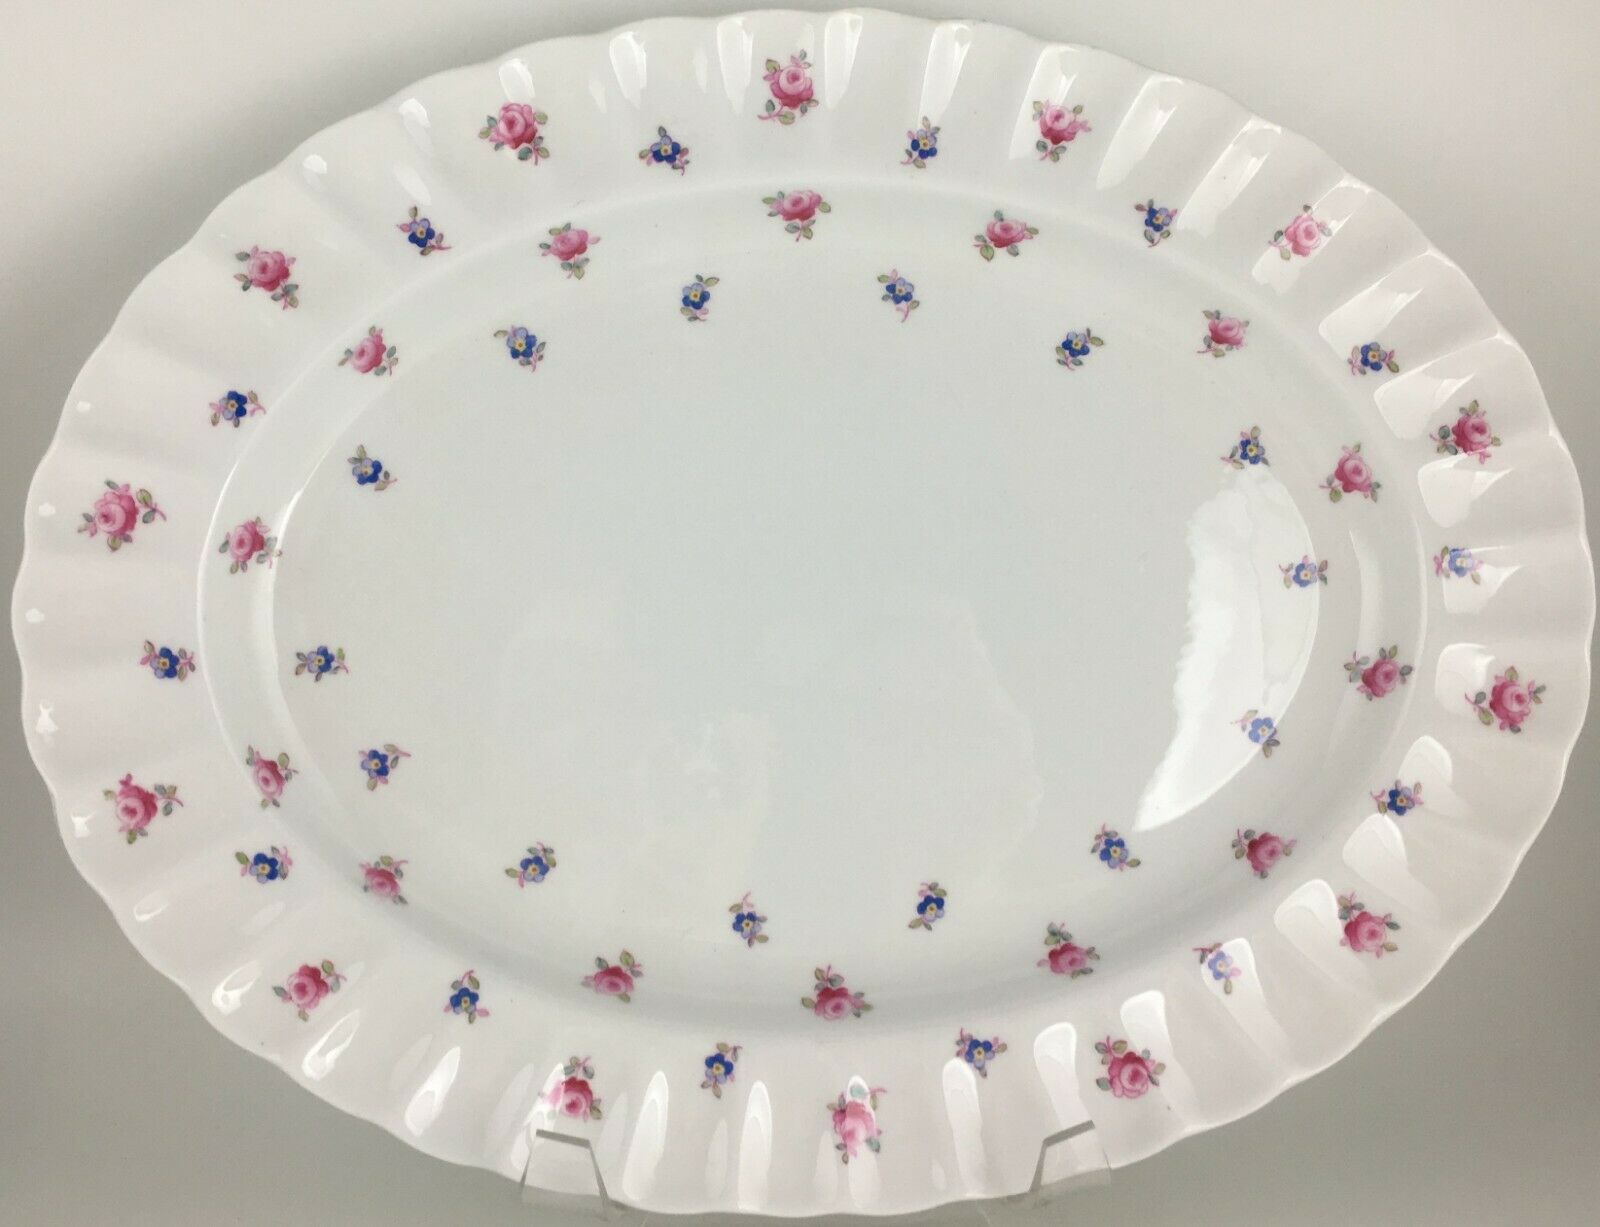 Primary image for Spode Dimity Y5764 Oval serving platter 12 "